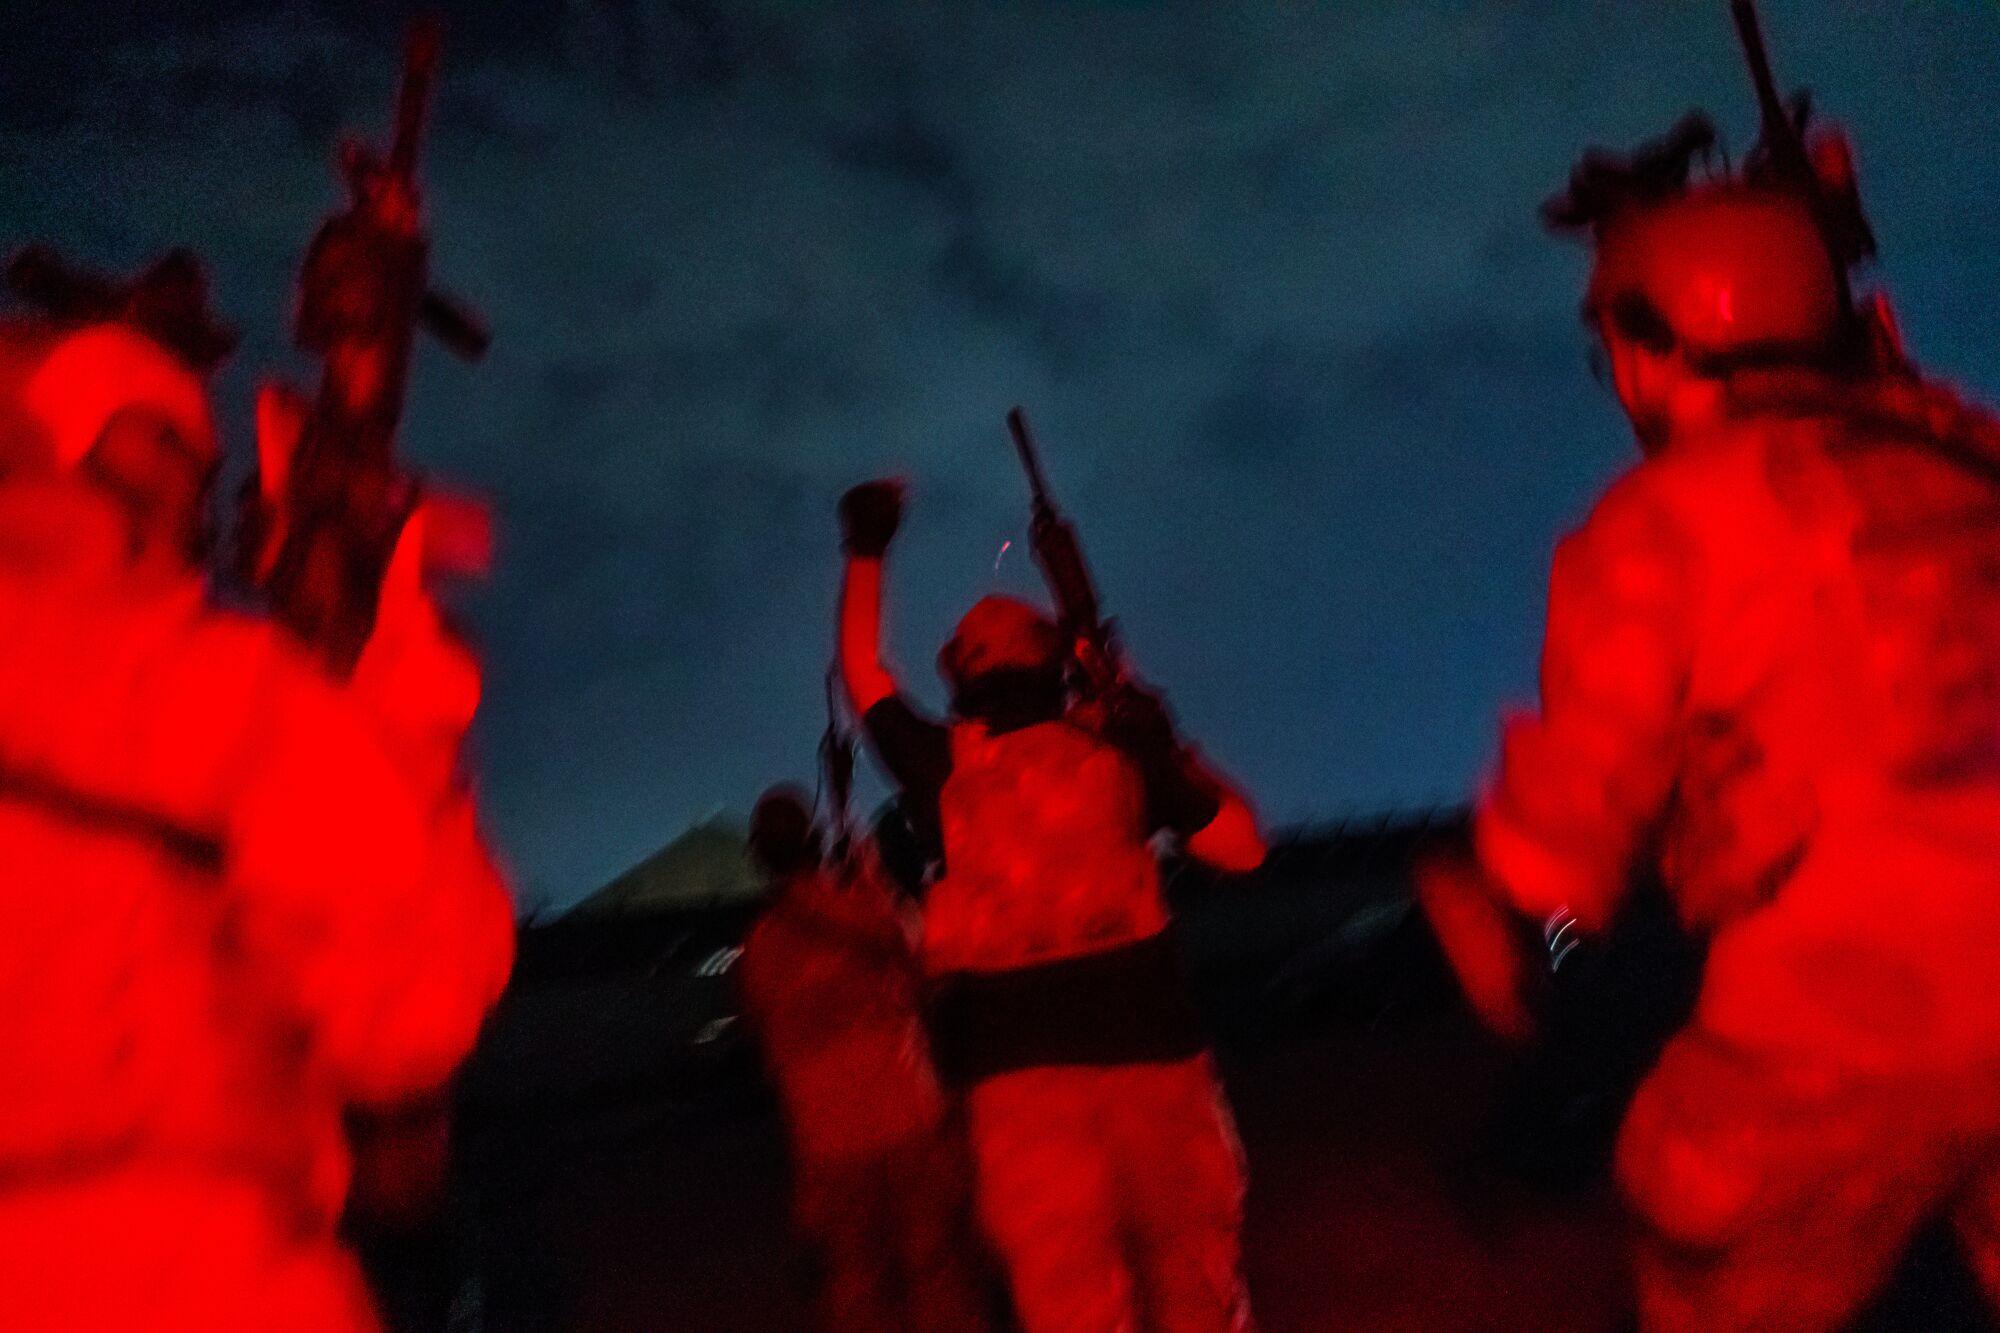 Soldiers seen from behind, lit in red light